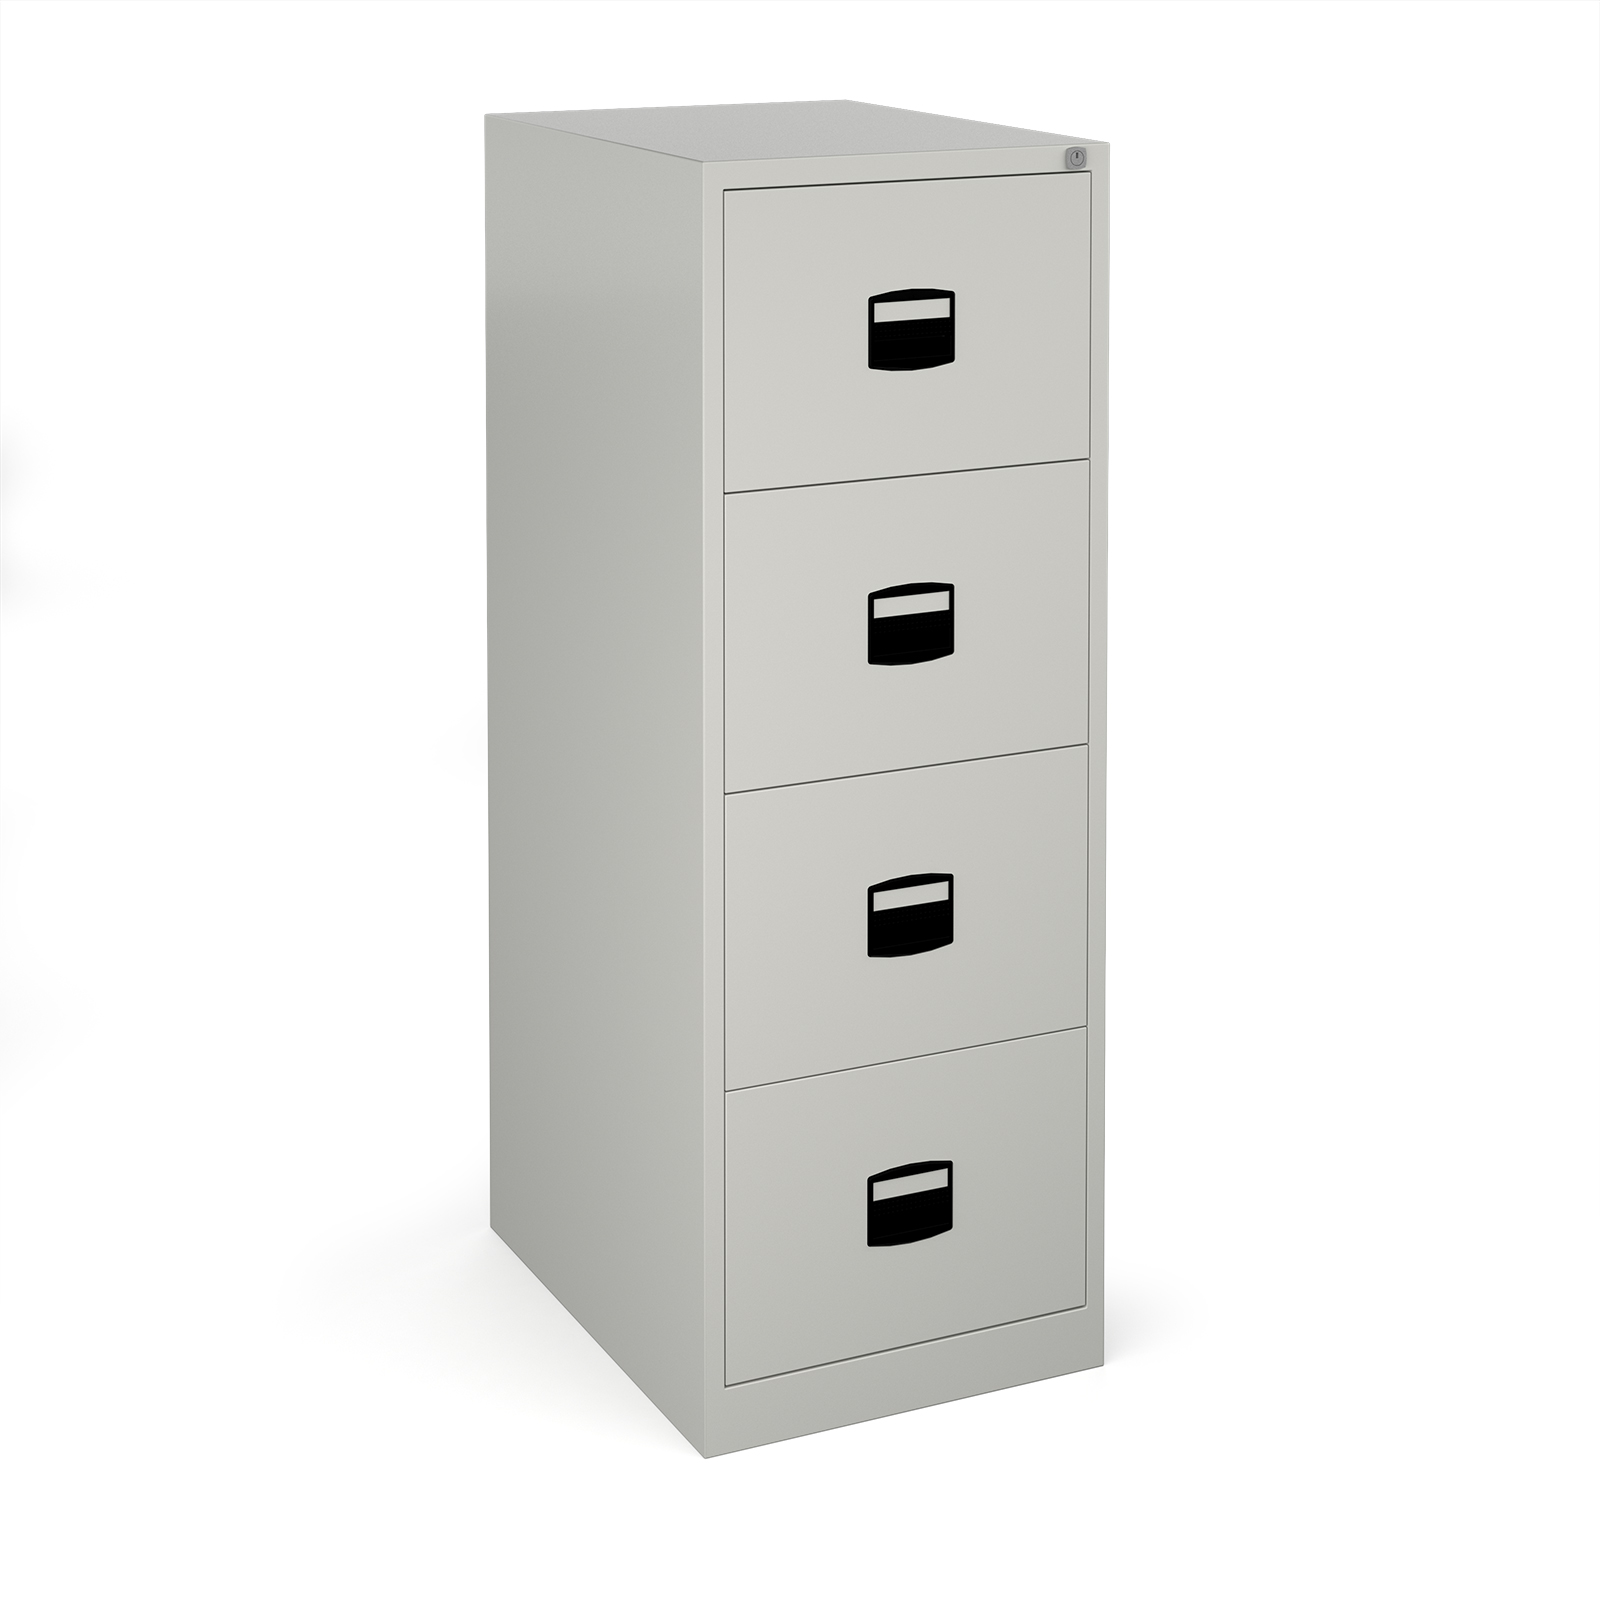 Steel Steel 4 drawer contract filing cabinet 1321mm high - goose grey